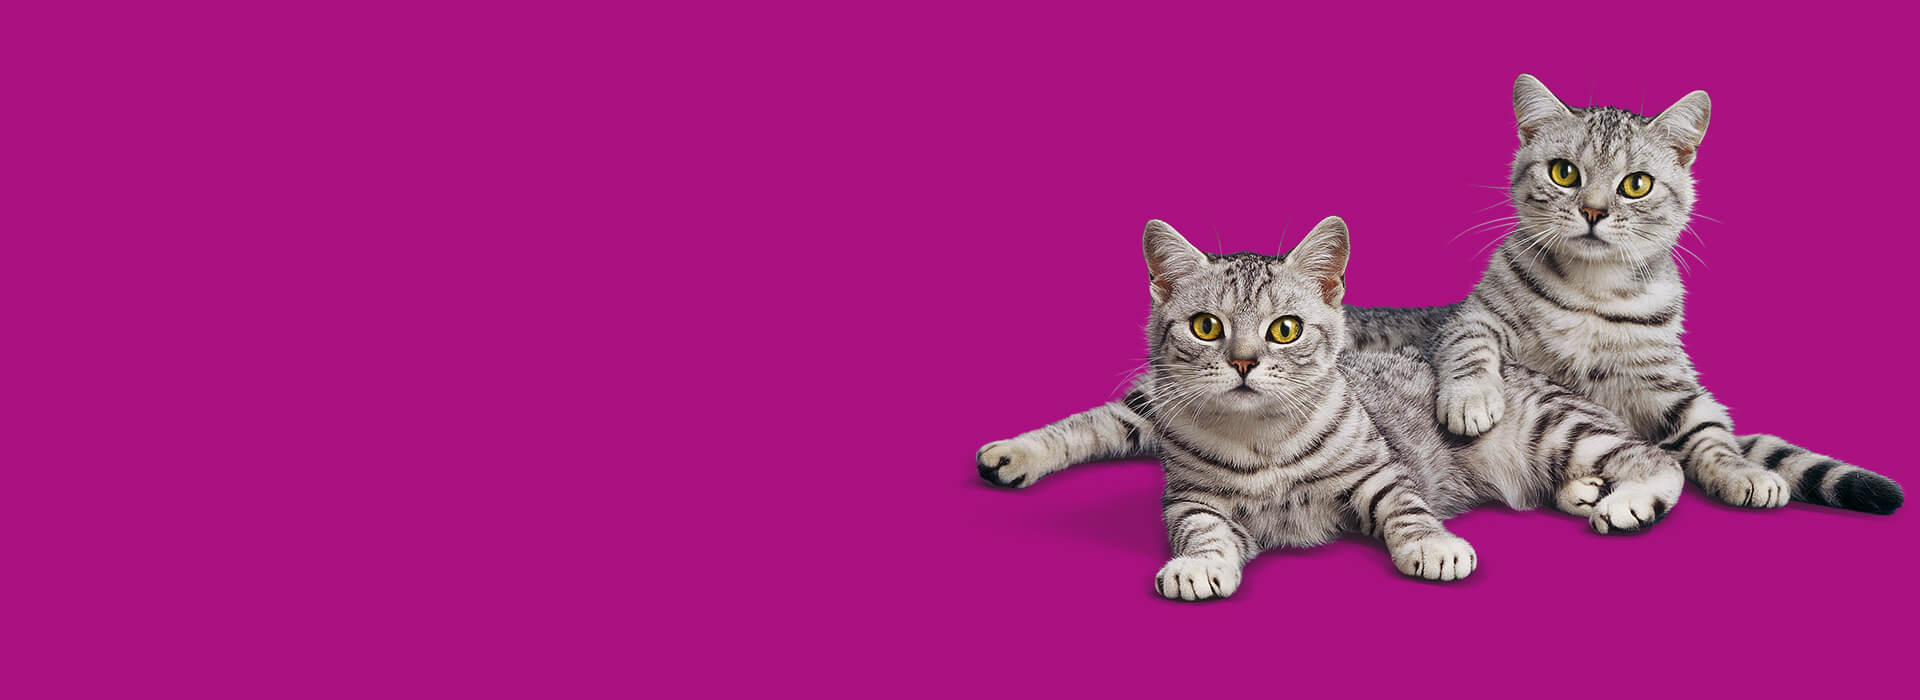 two cats sitting on purple background